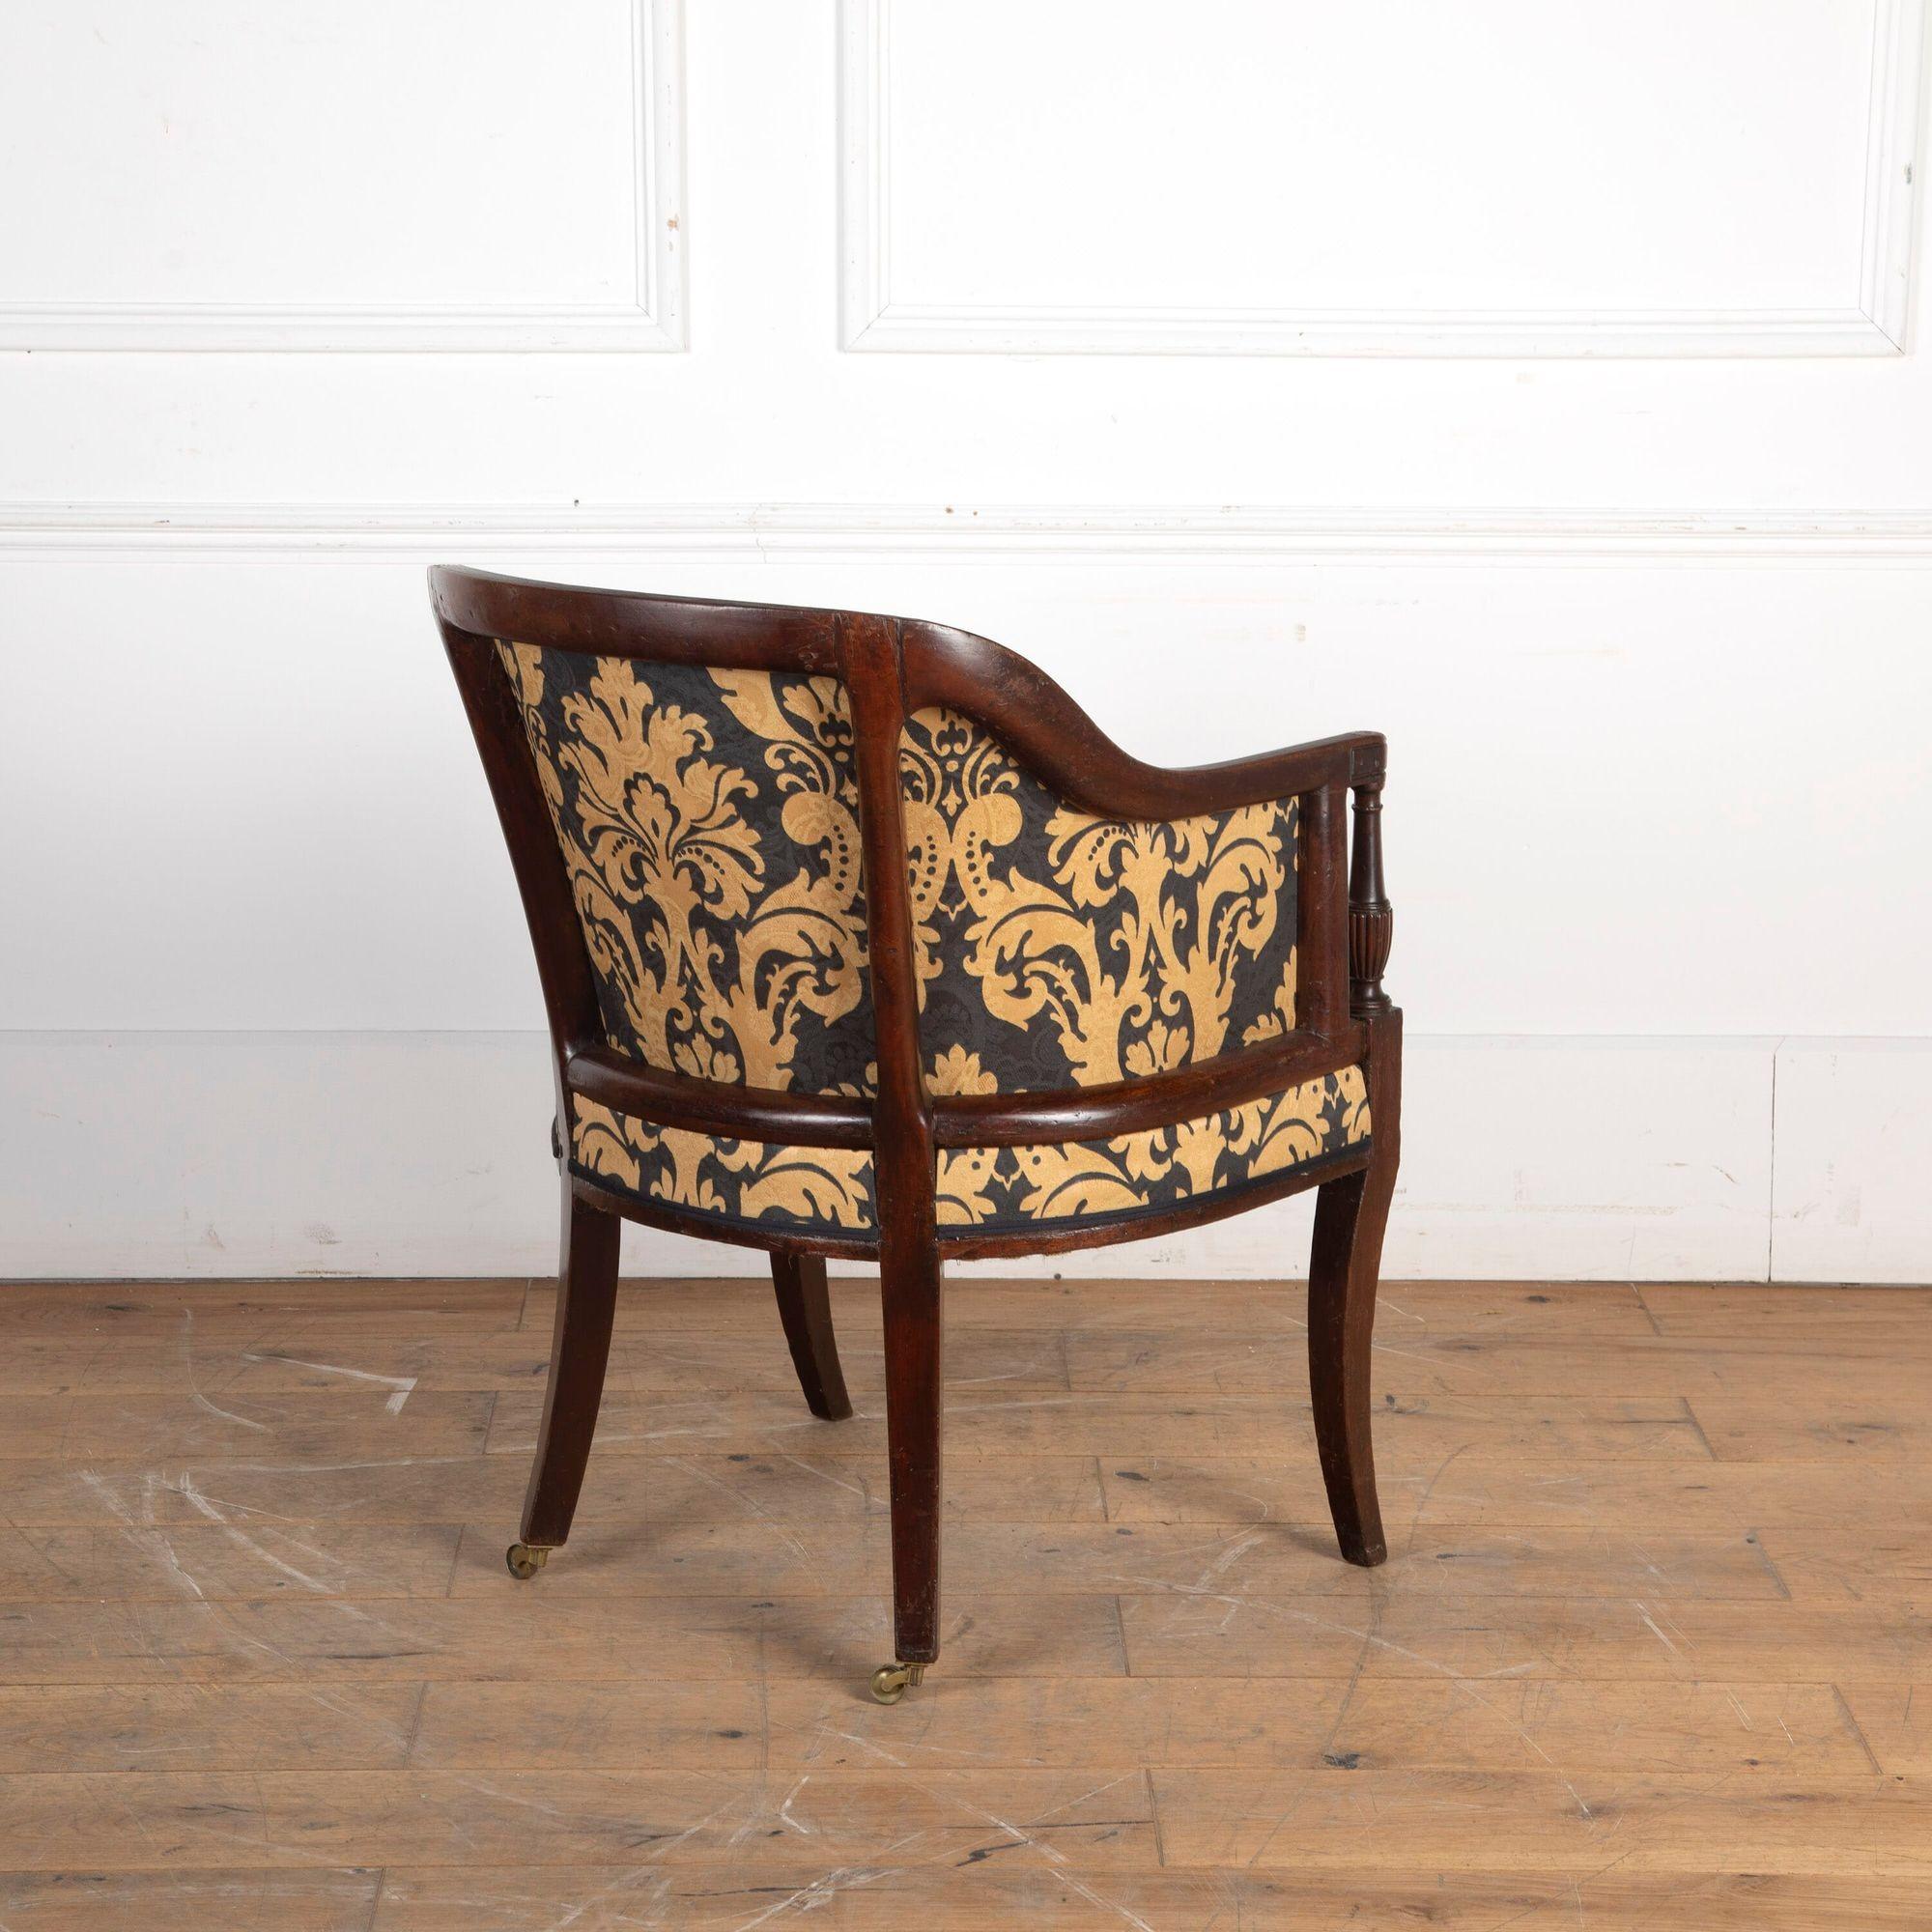 Fine early 19th Century Geo III mahogany upholstered library chair.
The arched back sweeps down to form armrests, with fluted baluster armrest supports to the front supported on square legs.
English, circa 1810.